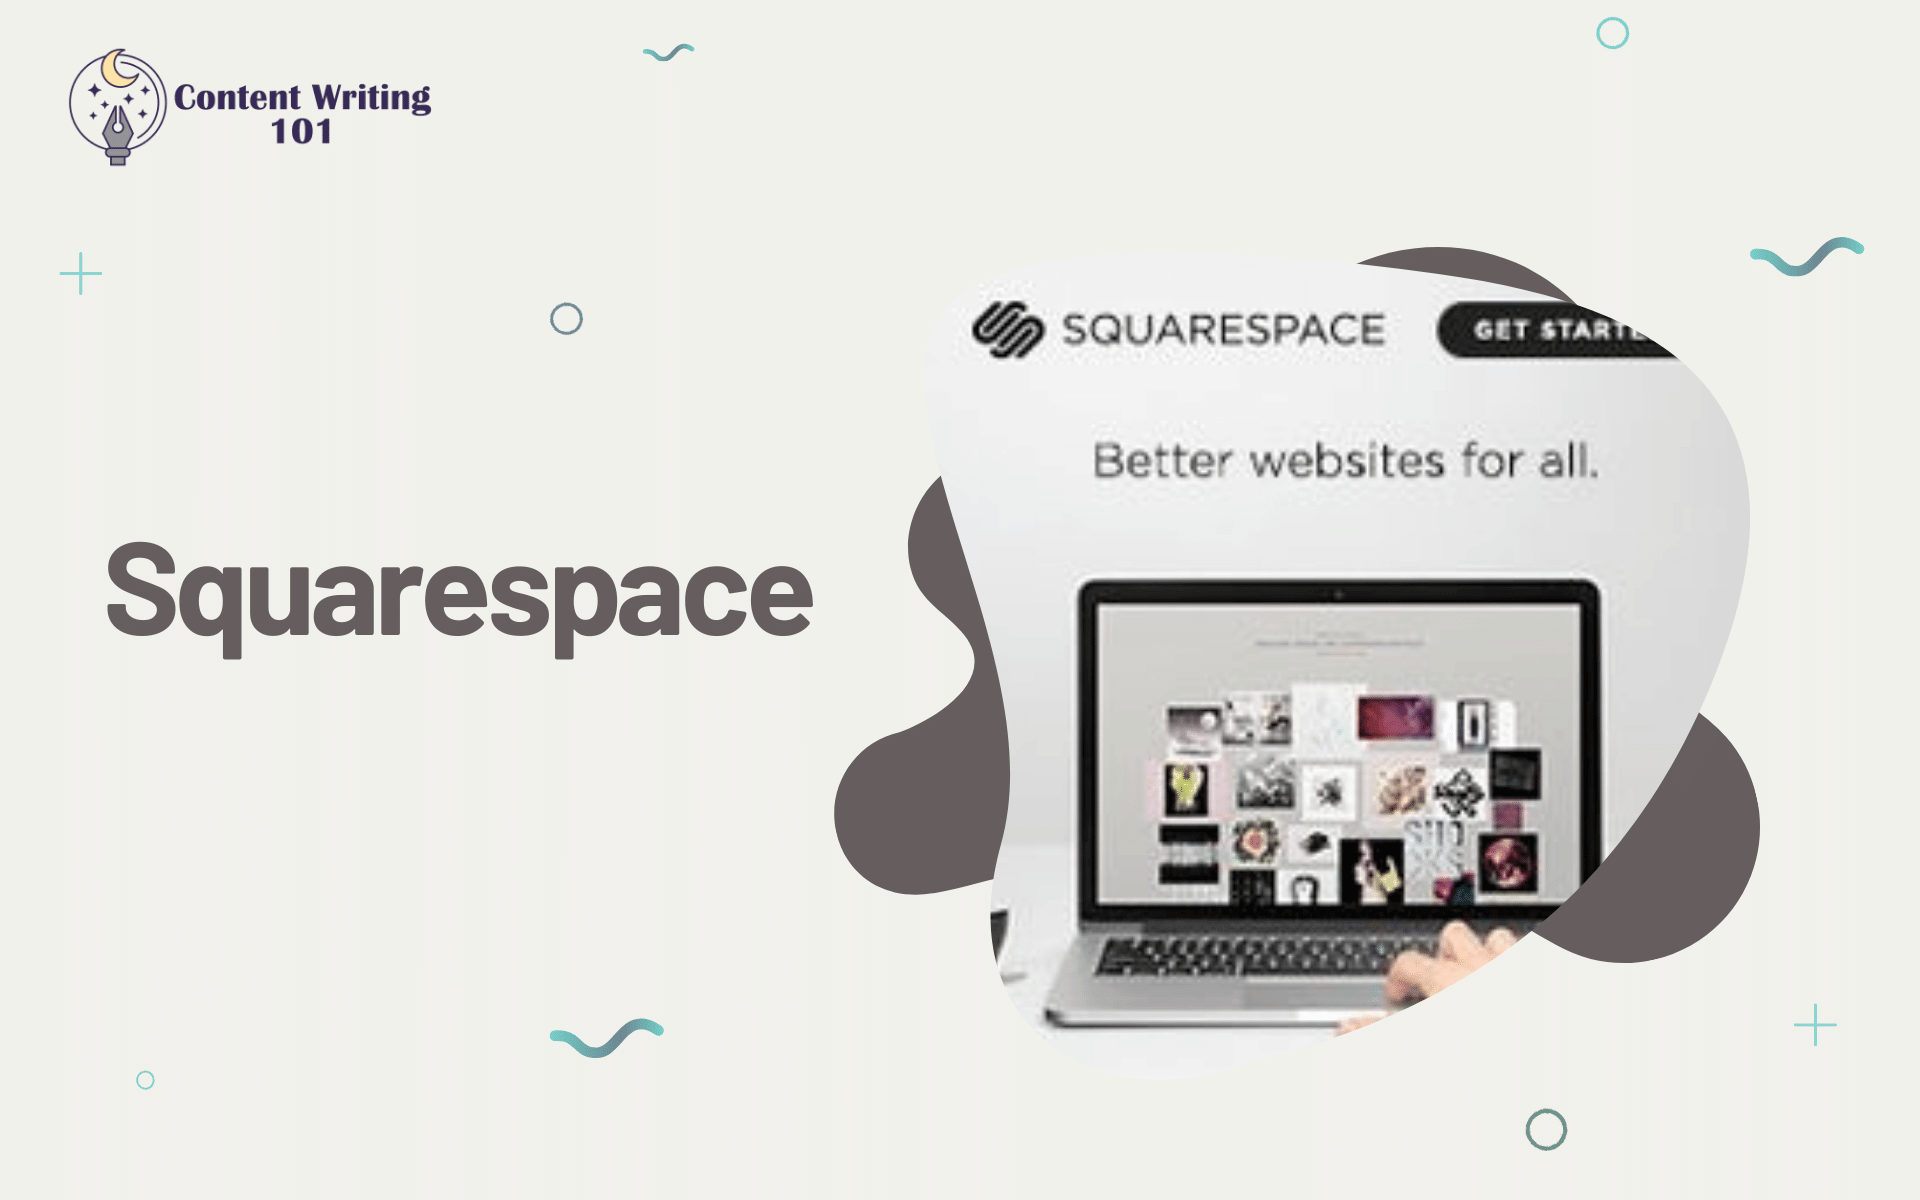 Squarespace Content Writing 101